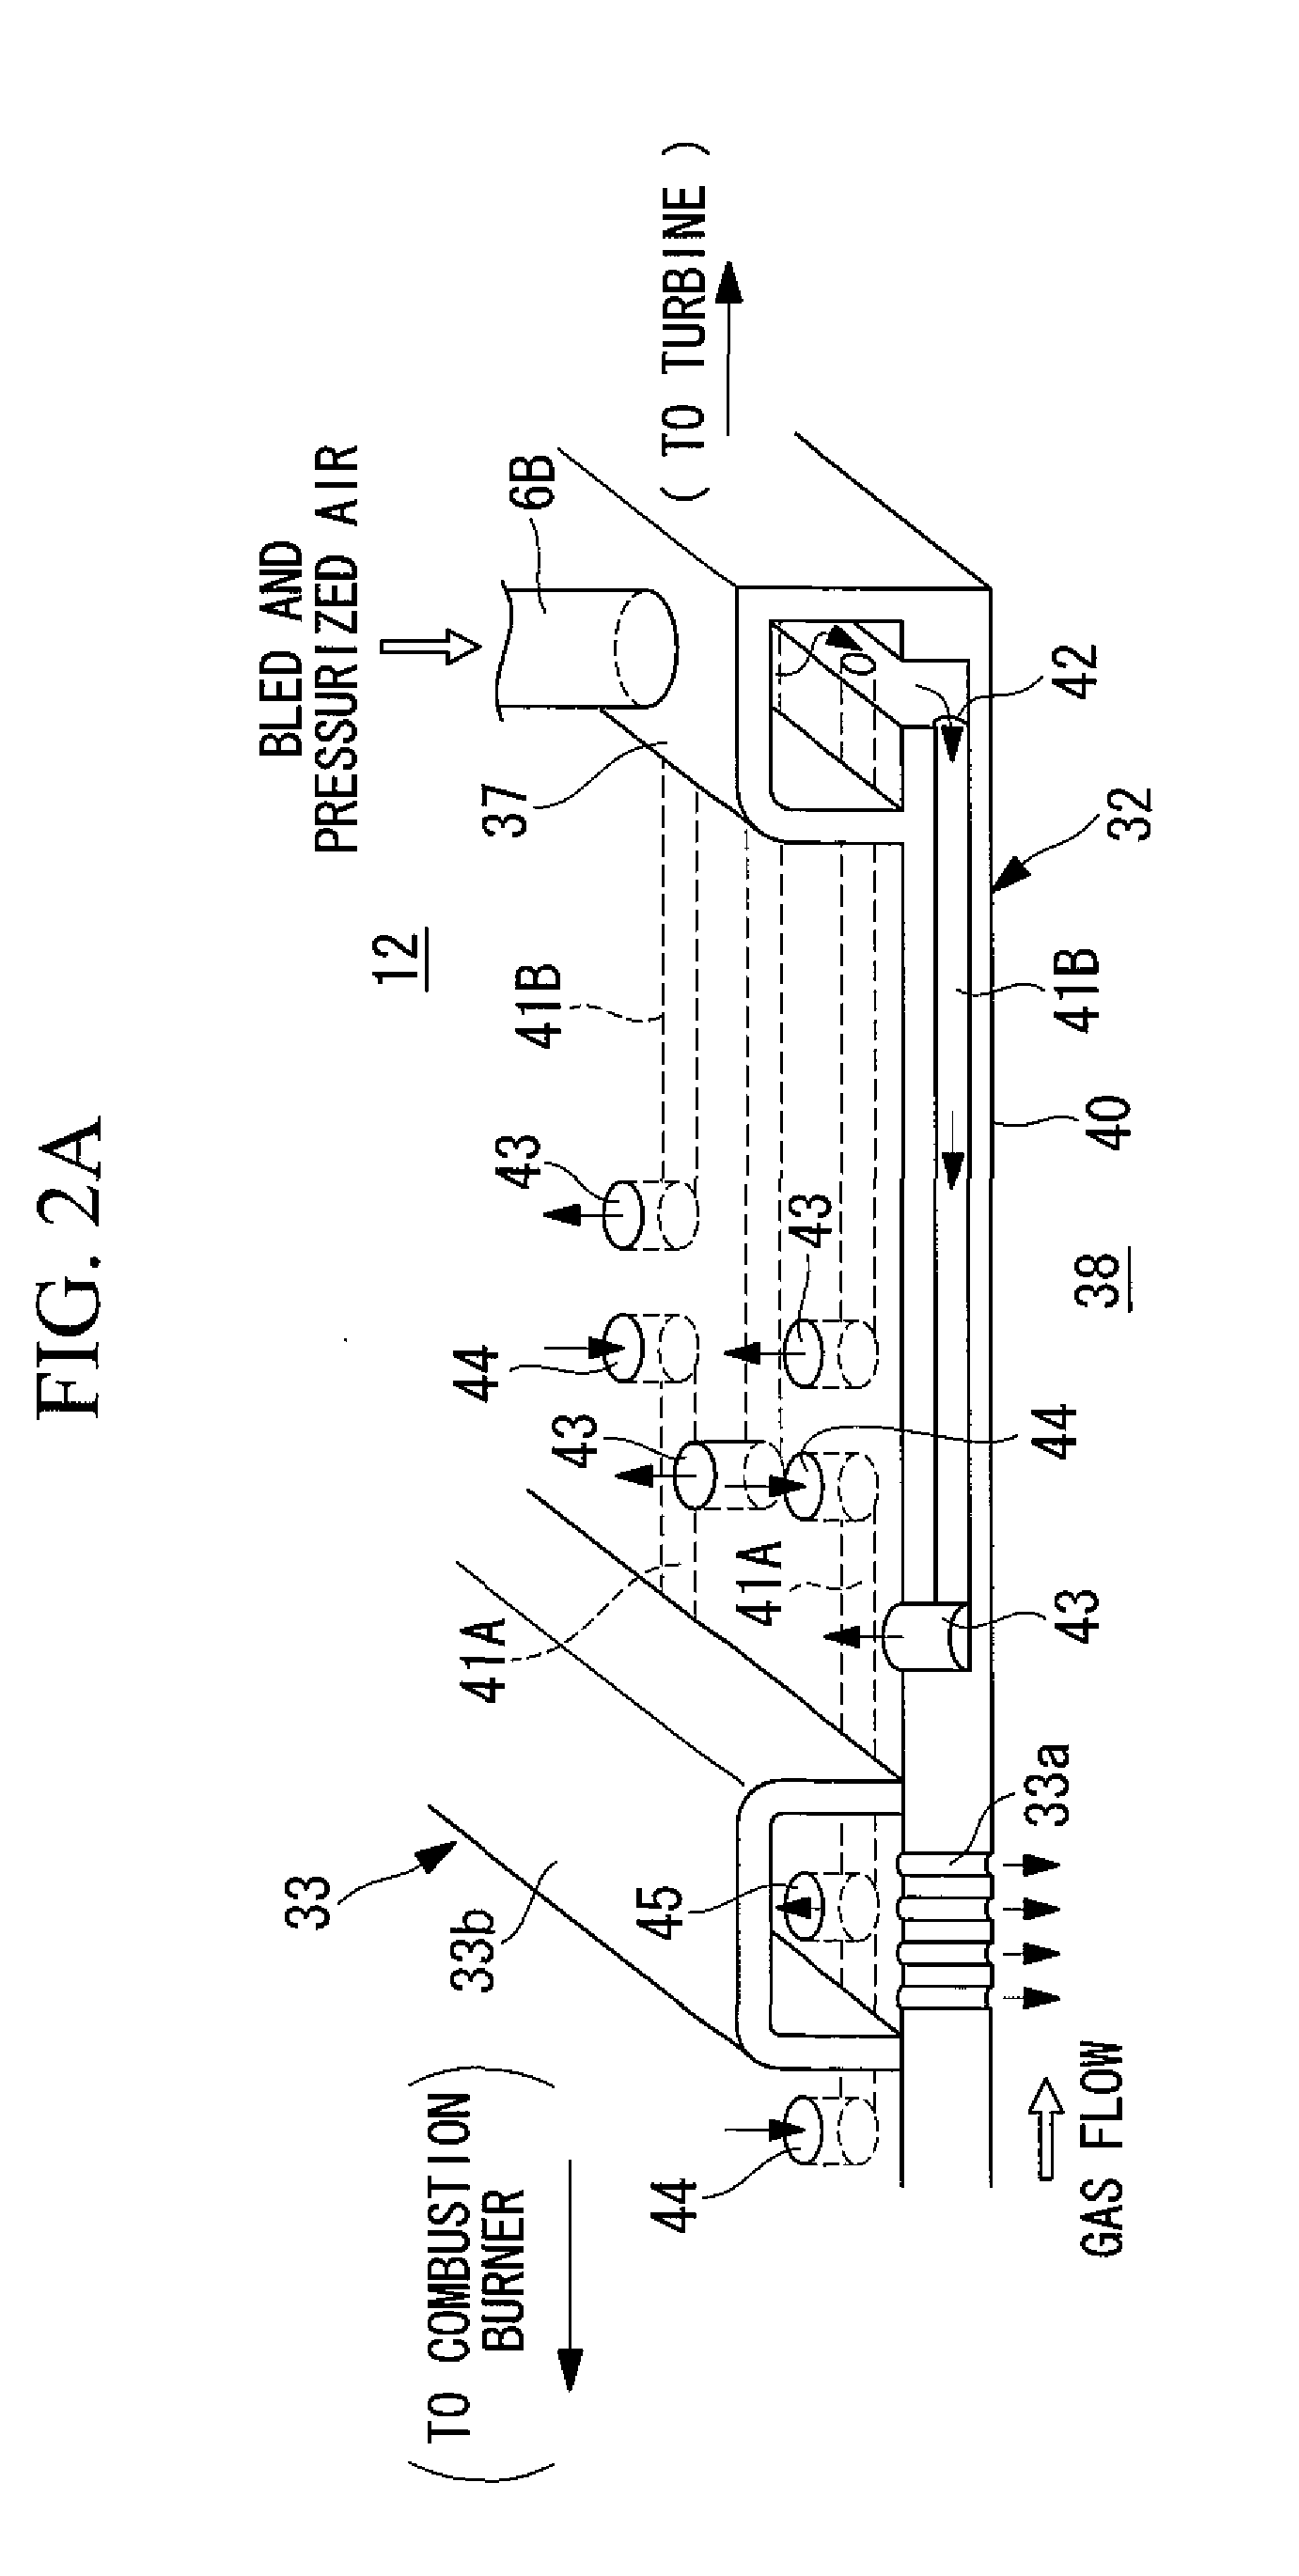 Coolng structure for recovery-type air-cooled gas turbine combustor